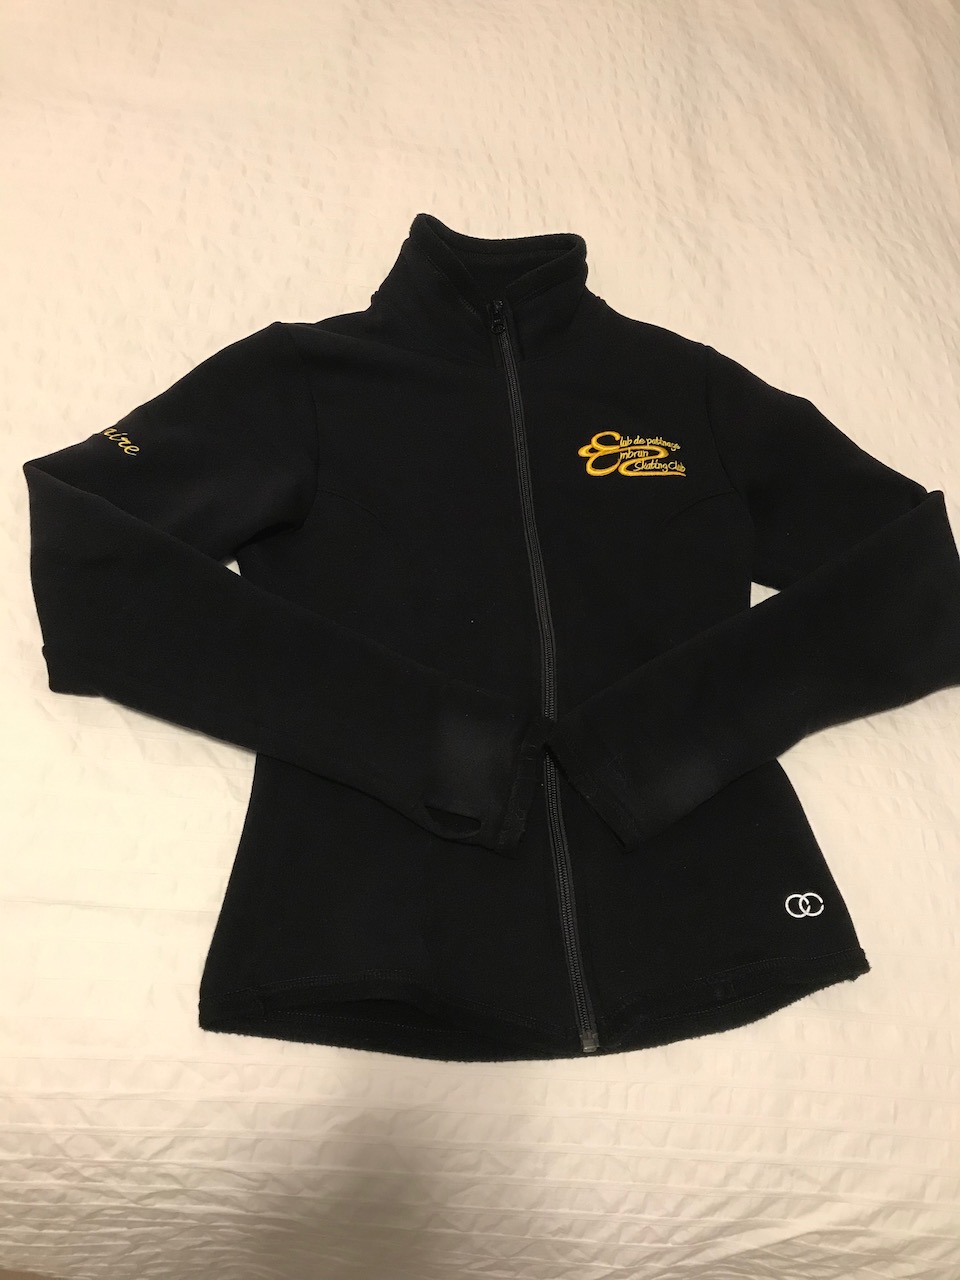 Front view of club jacket